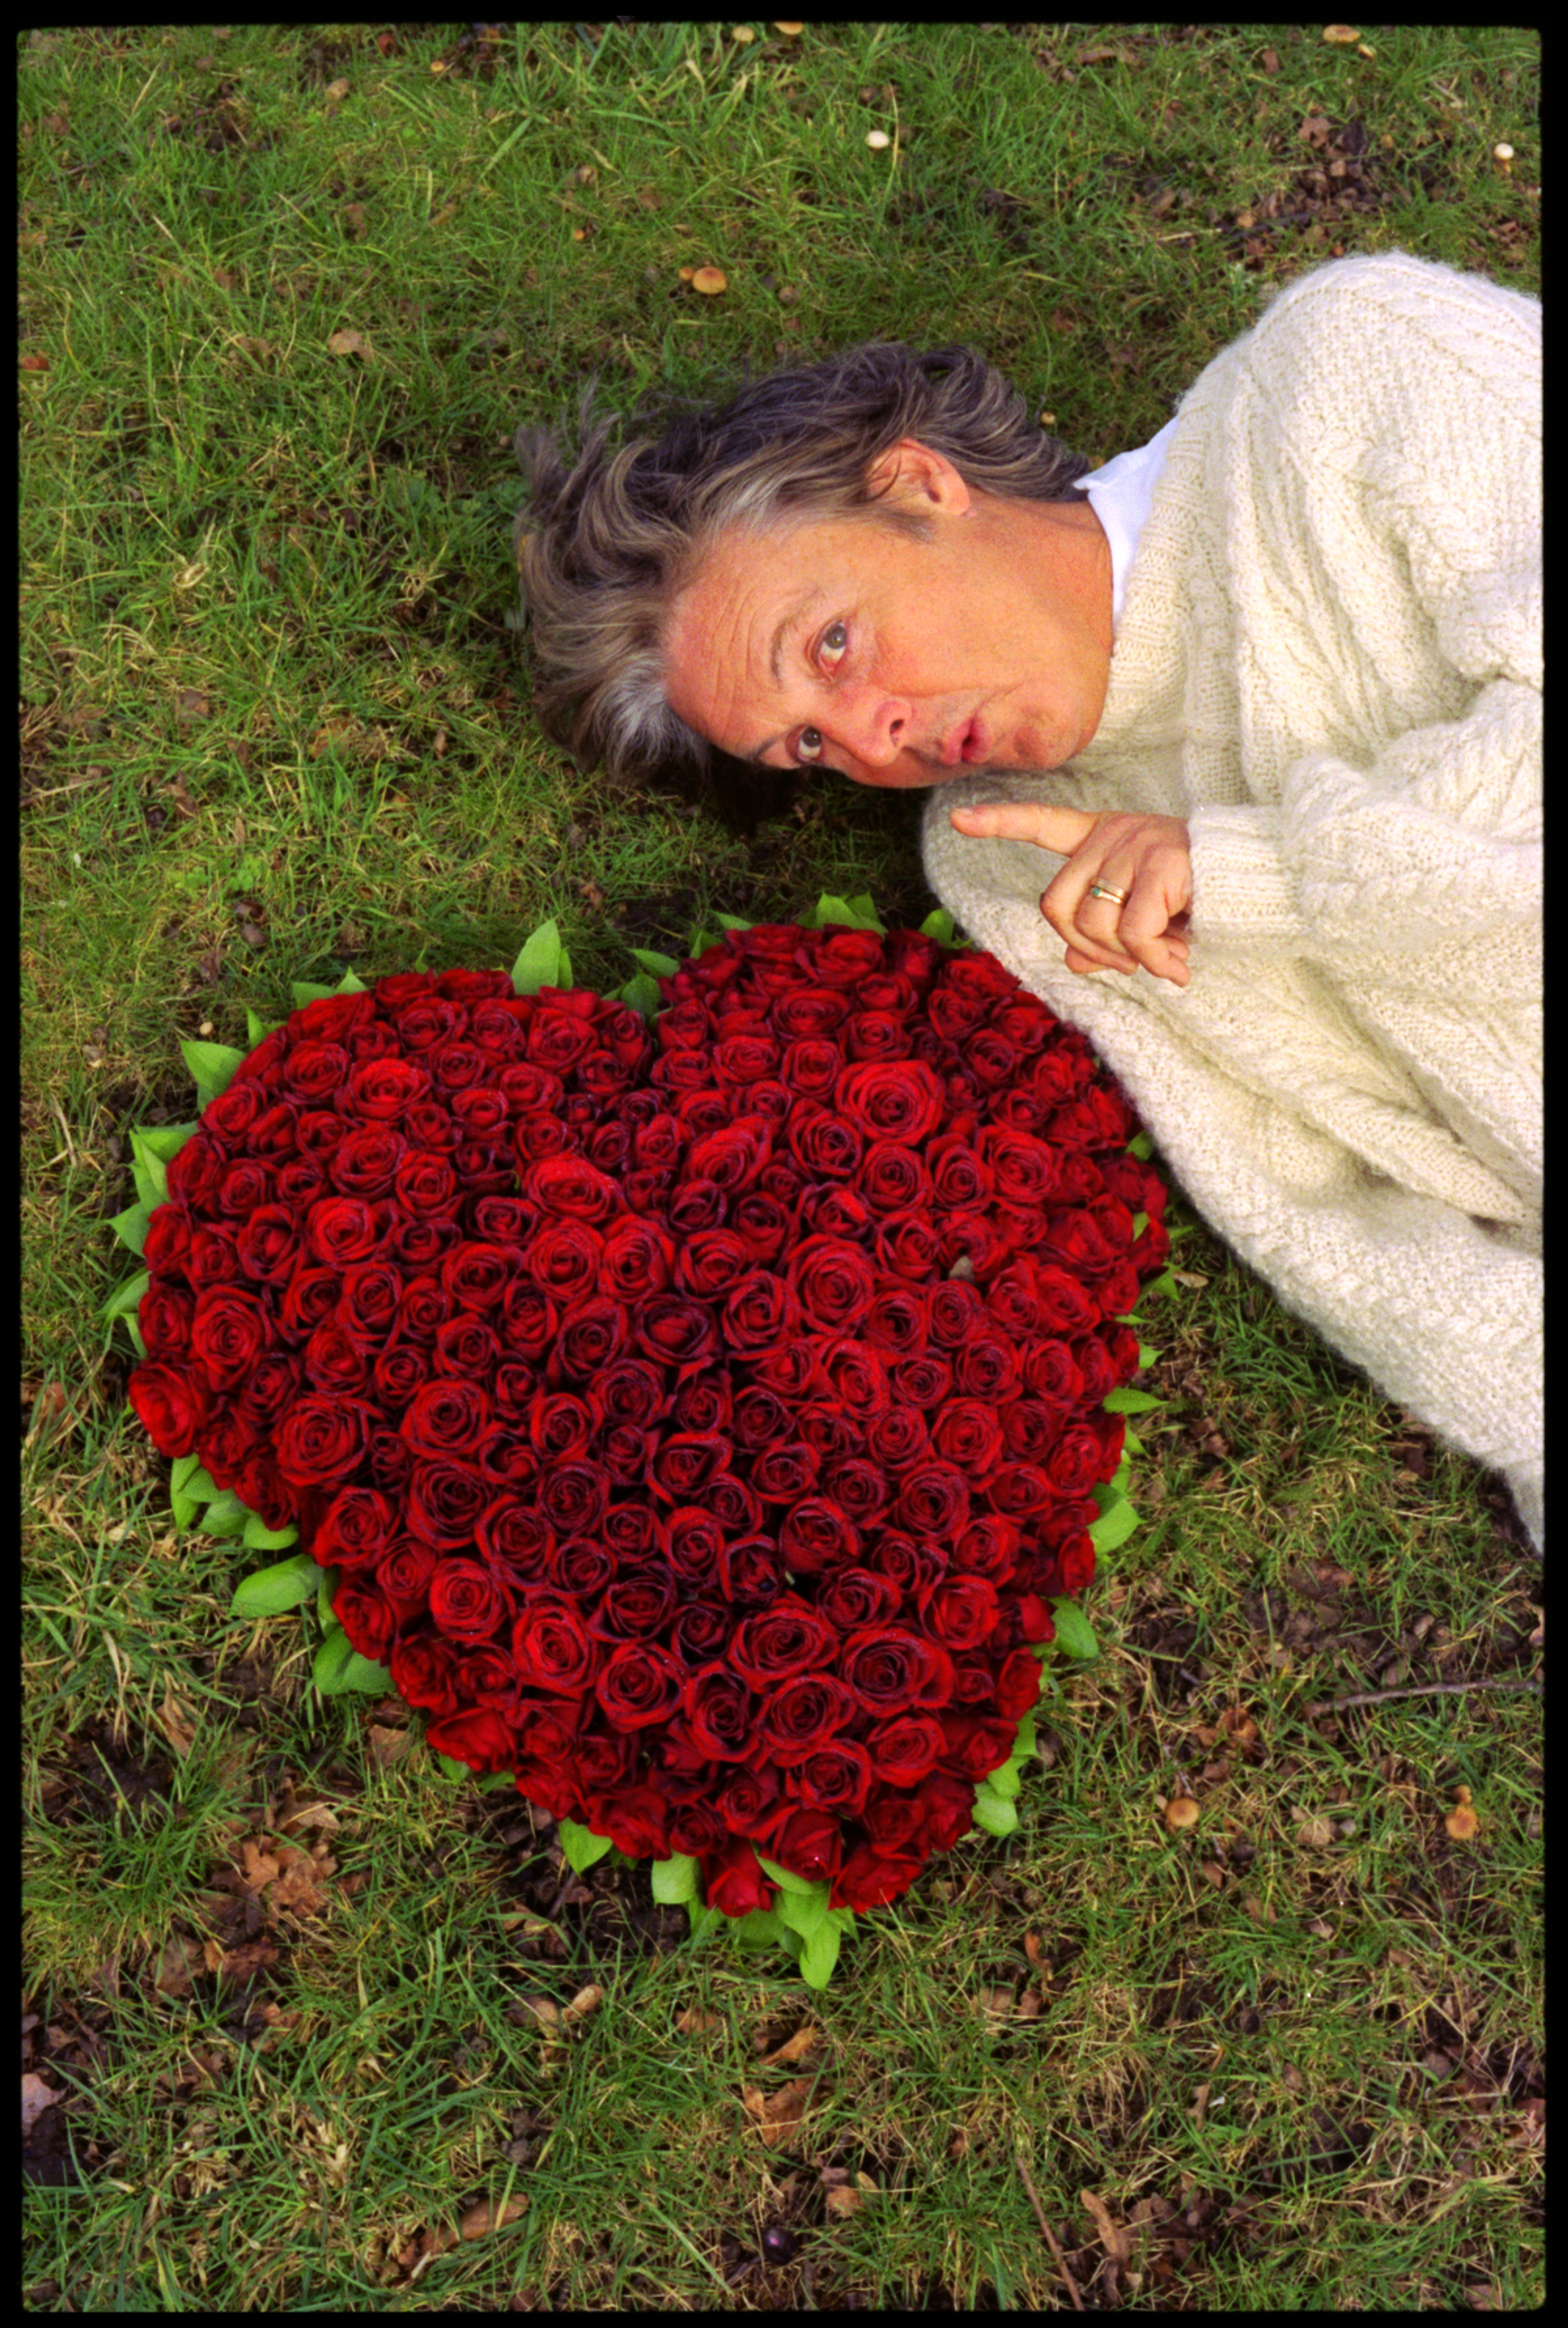 Paul lying on the ground with a heart-shaped display of red roses